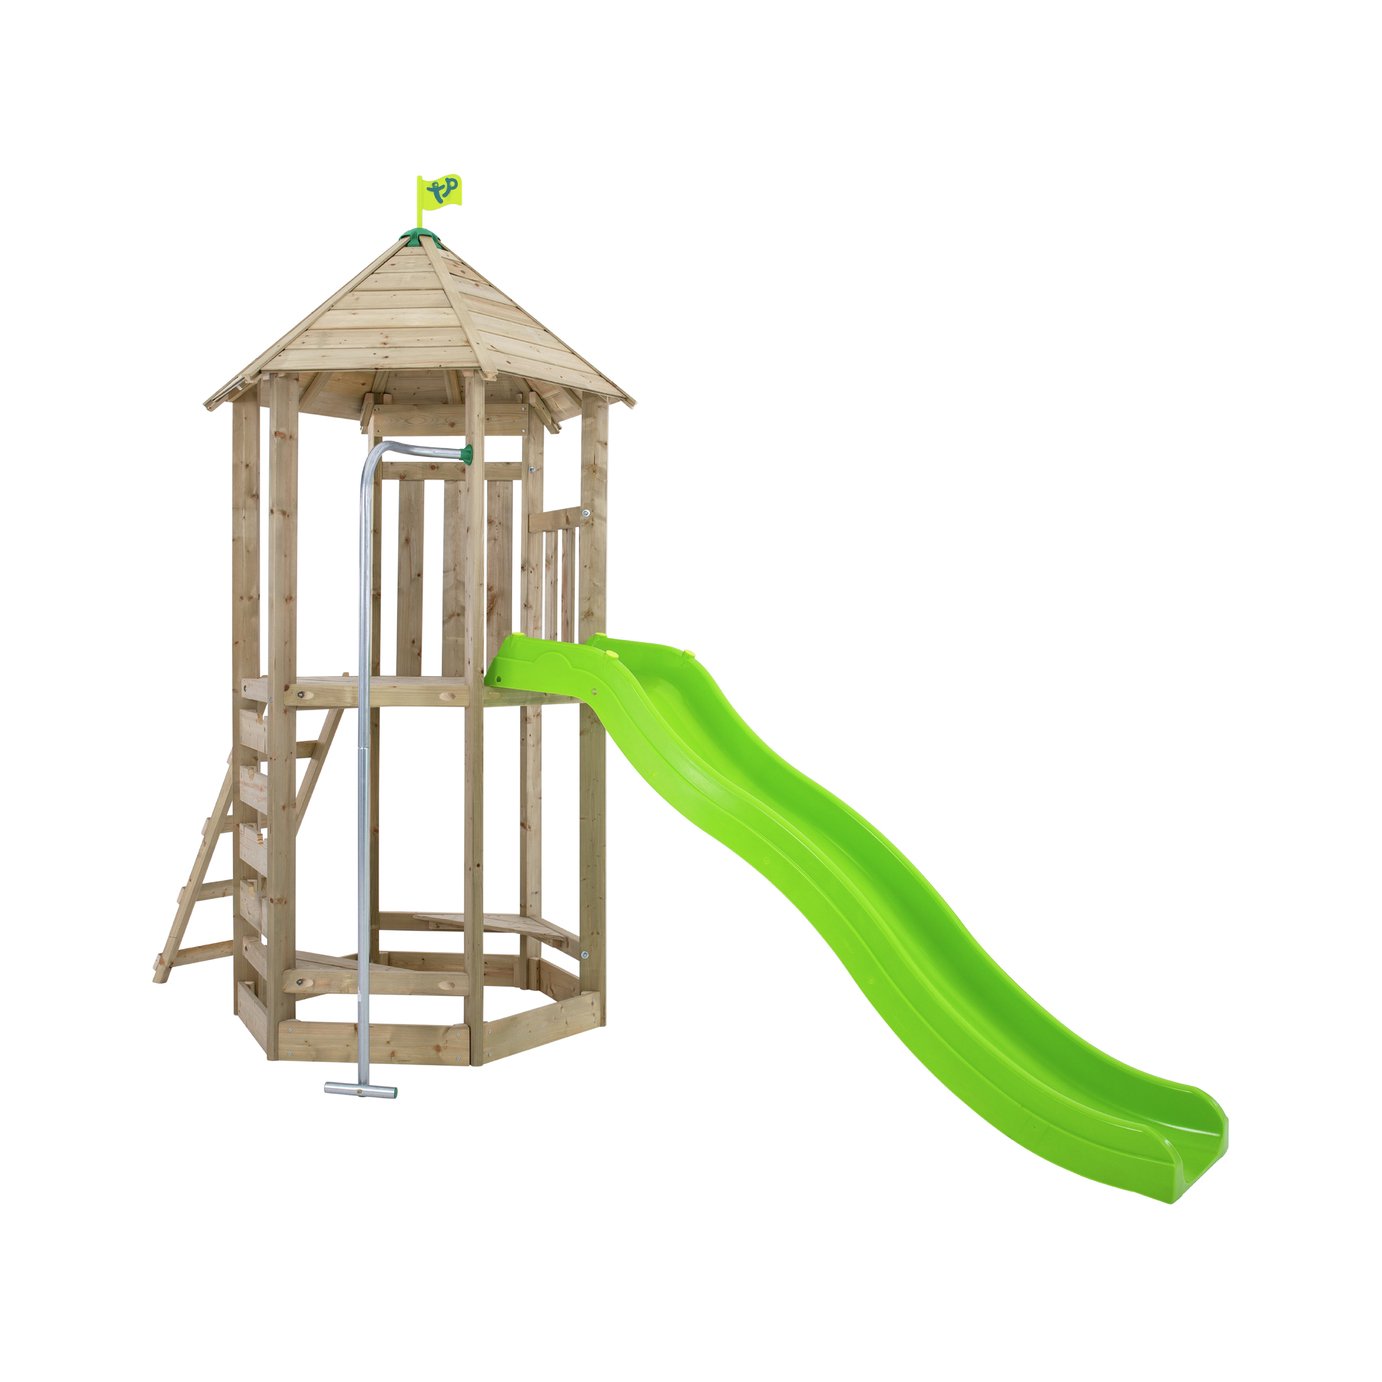 TP Castlewood Warwick Swing and Slide Review